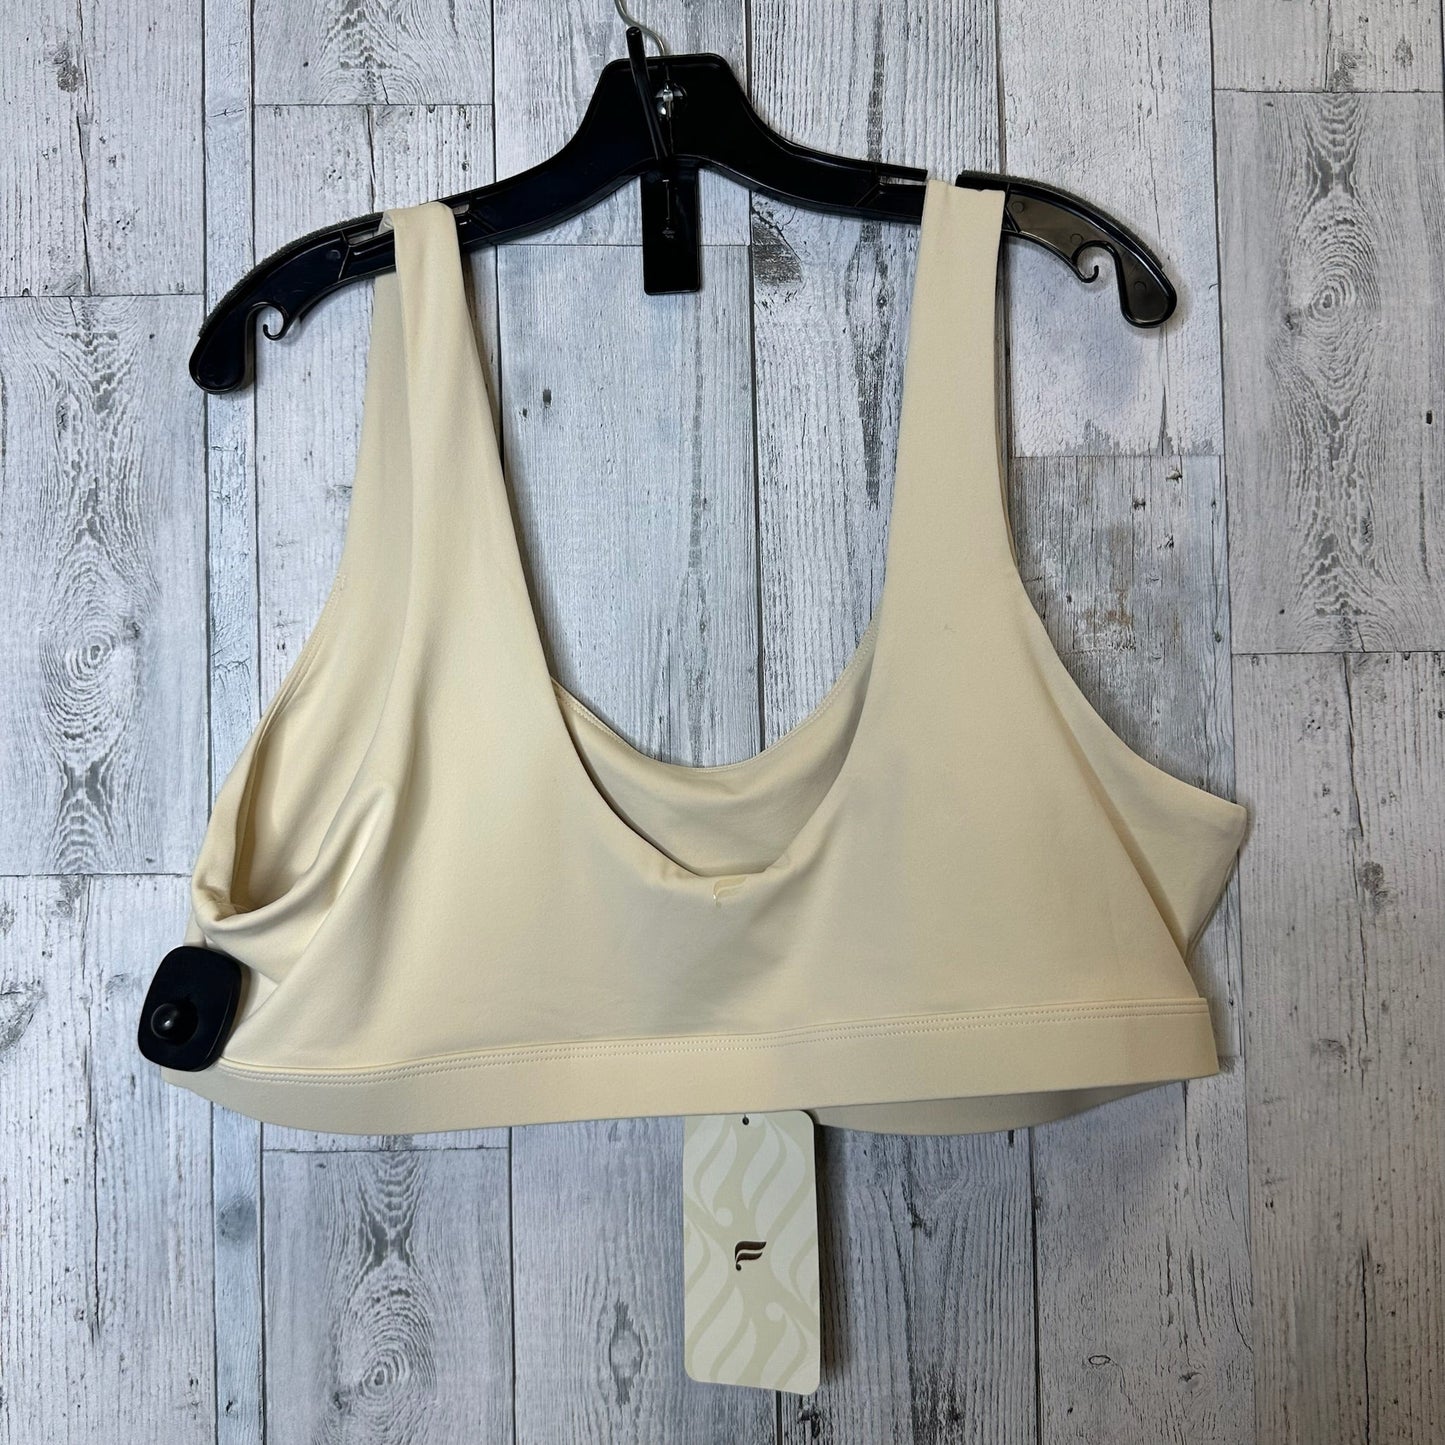 Athletic Bra By Fabletics  Size: 3x